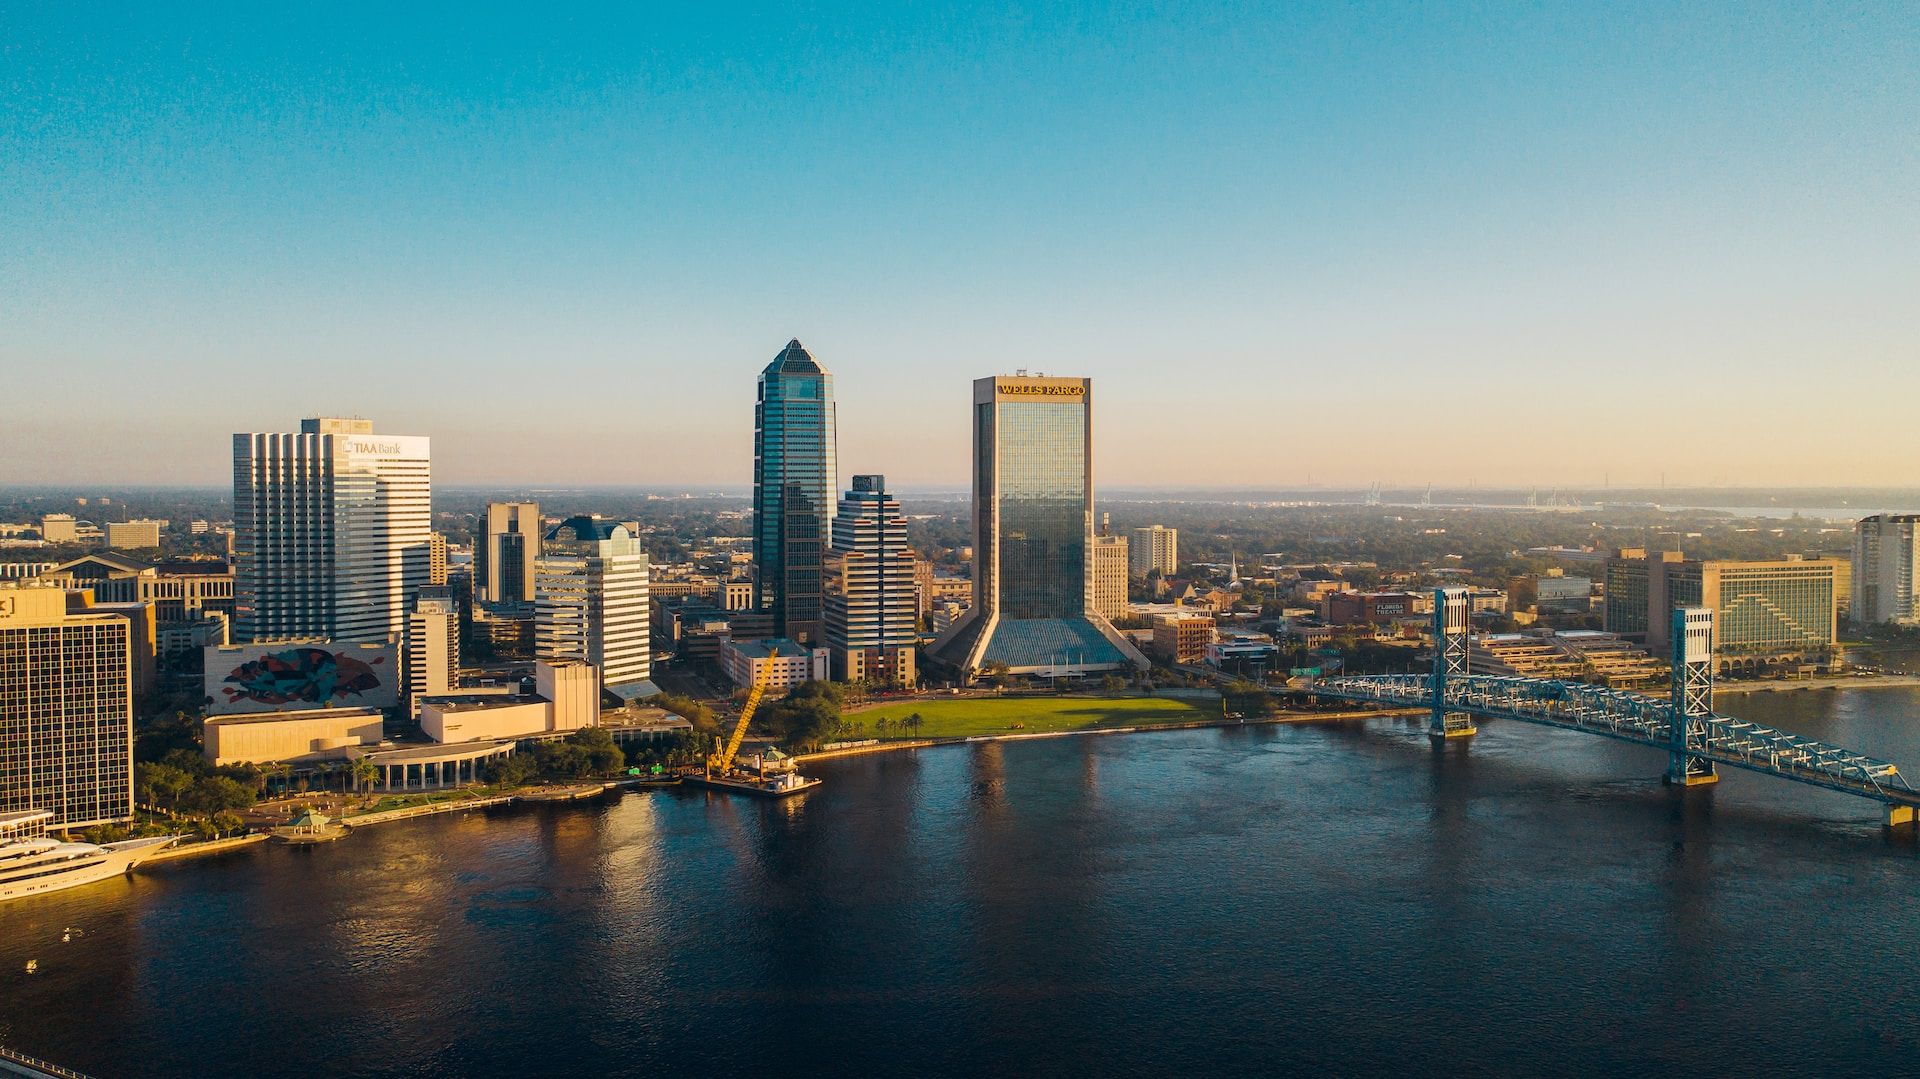 Jacksonville, Florida from the air